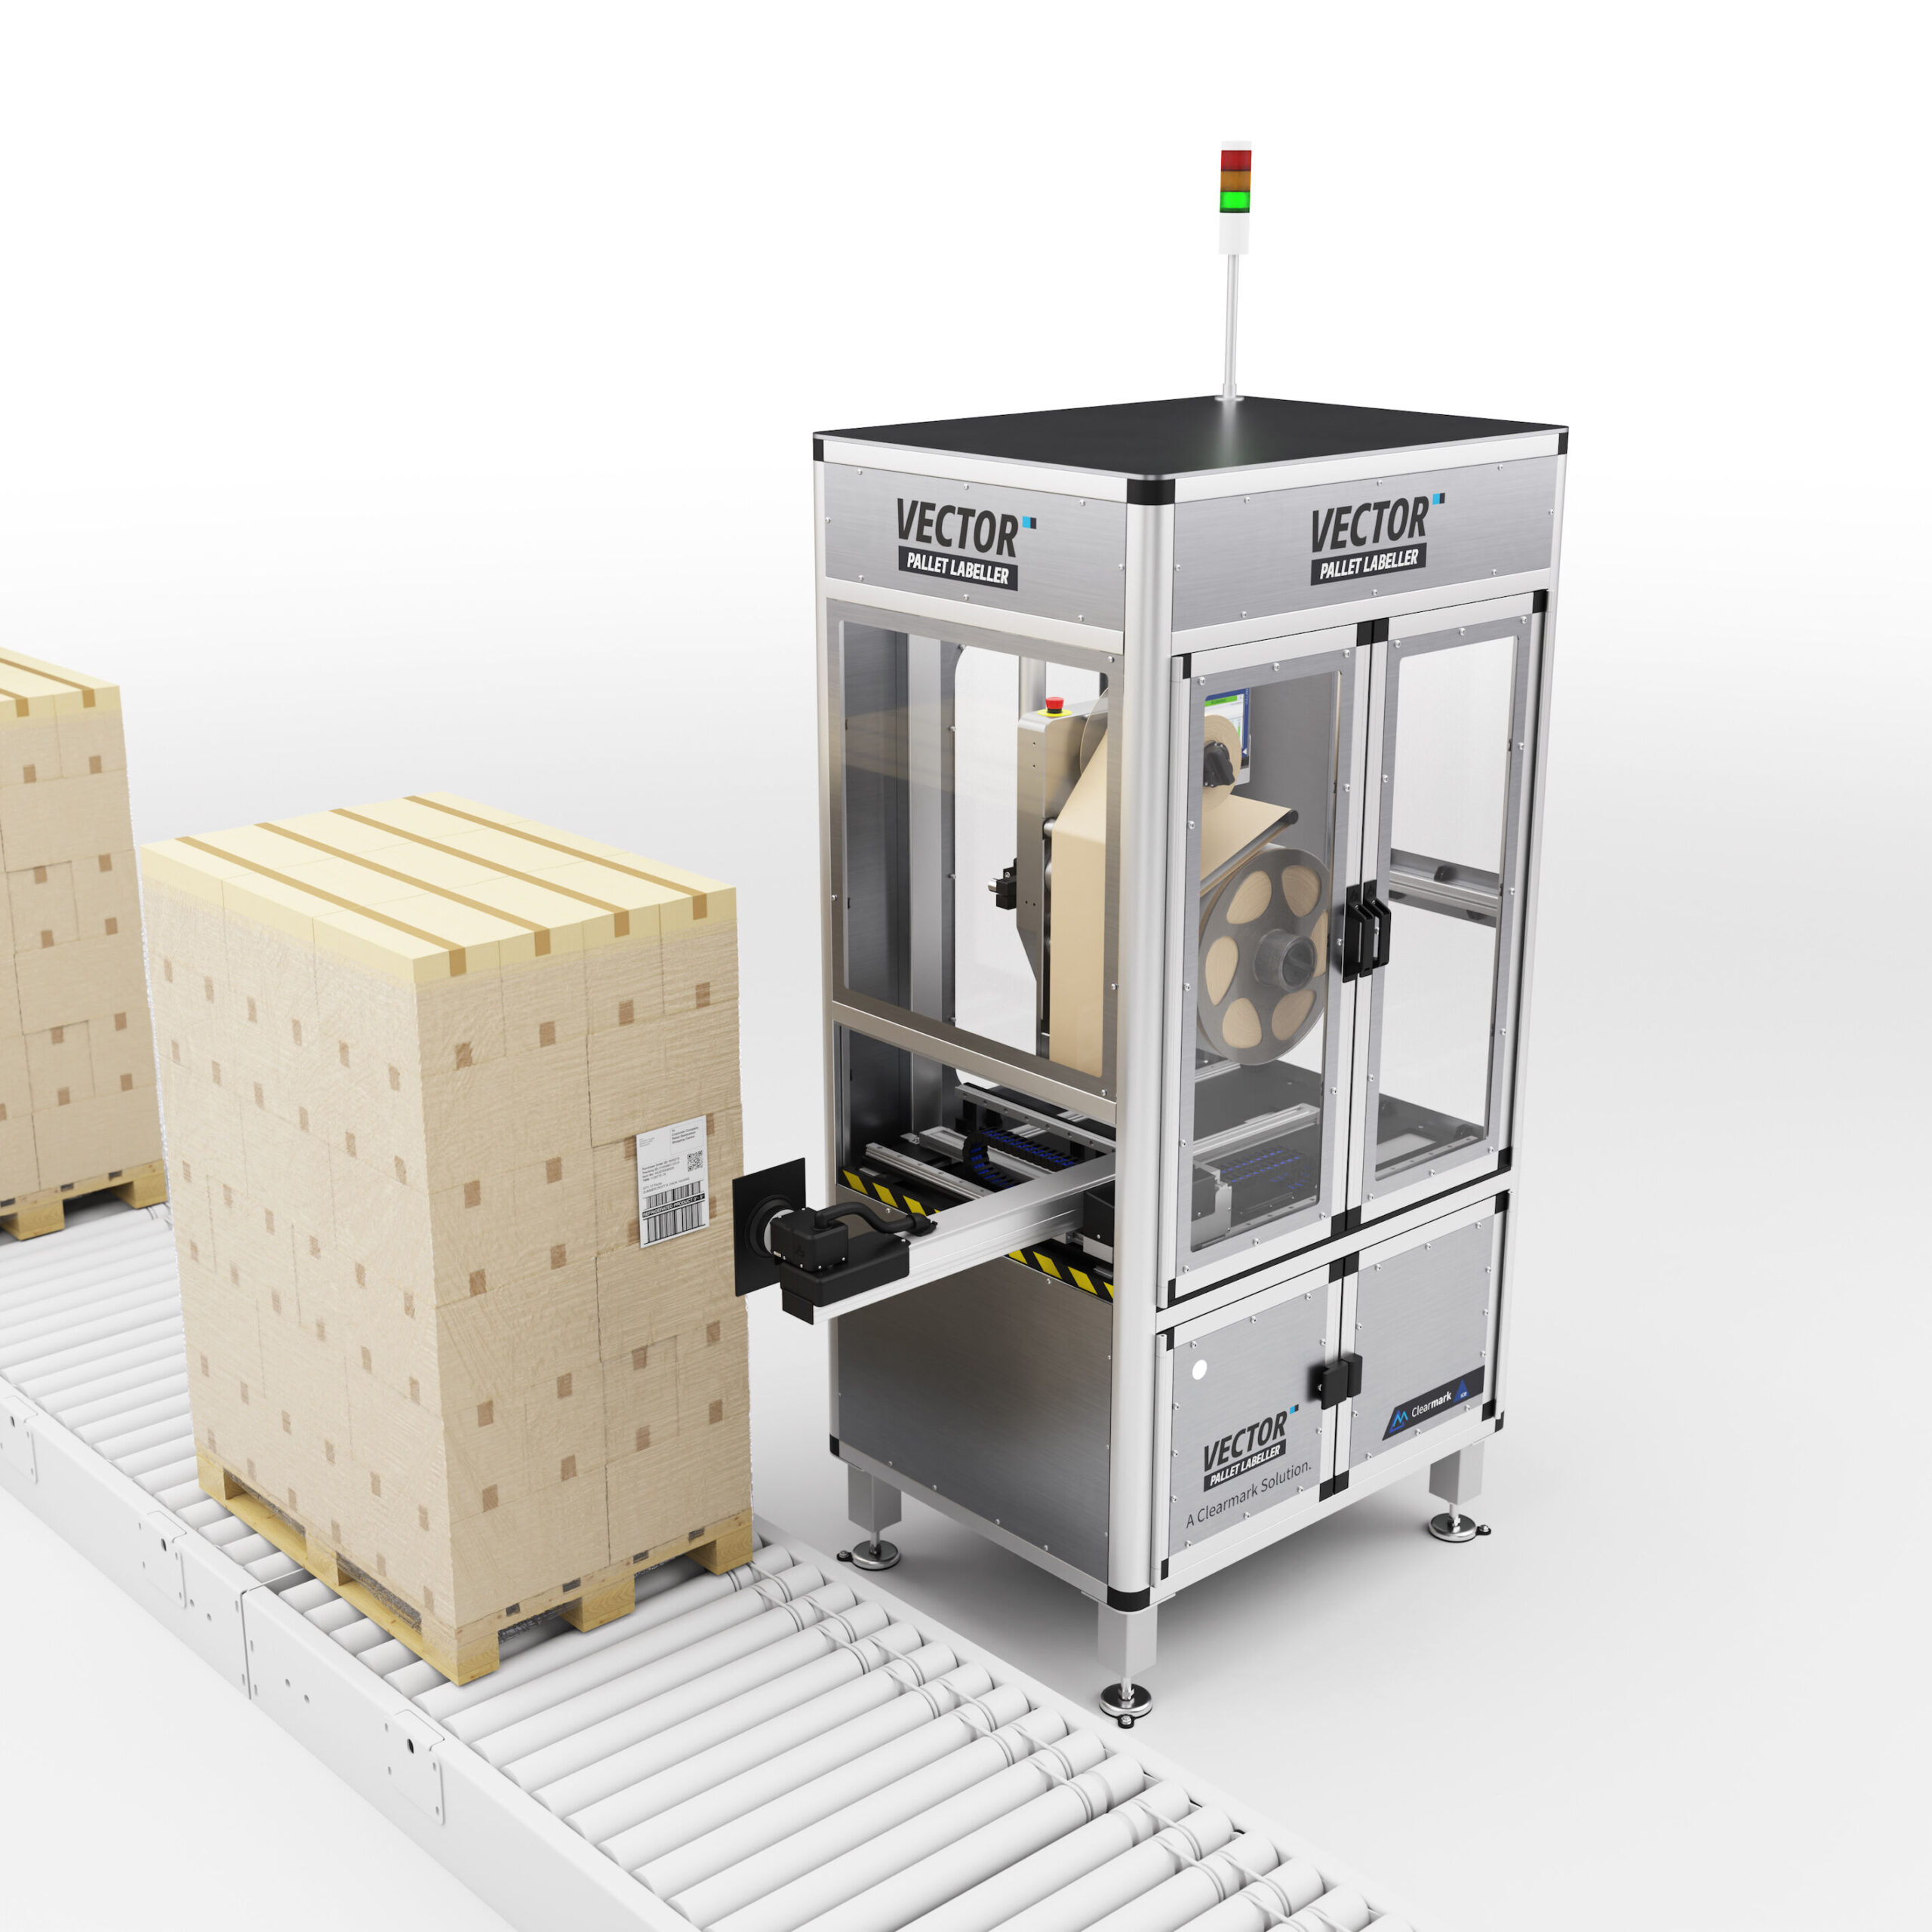 ICE Vector establishes Clearmark’s foray into pallet labelling